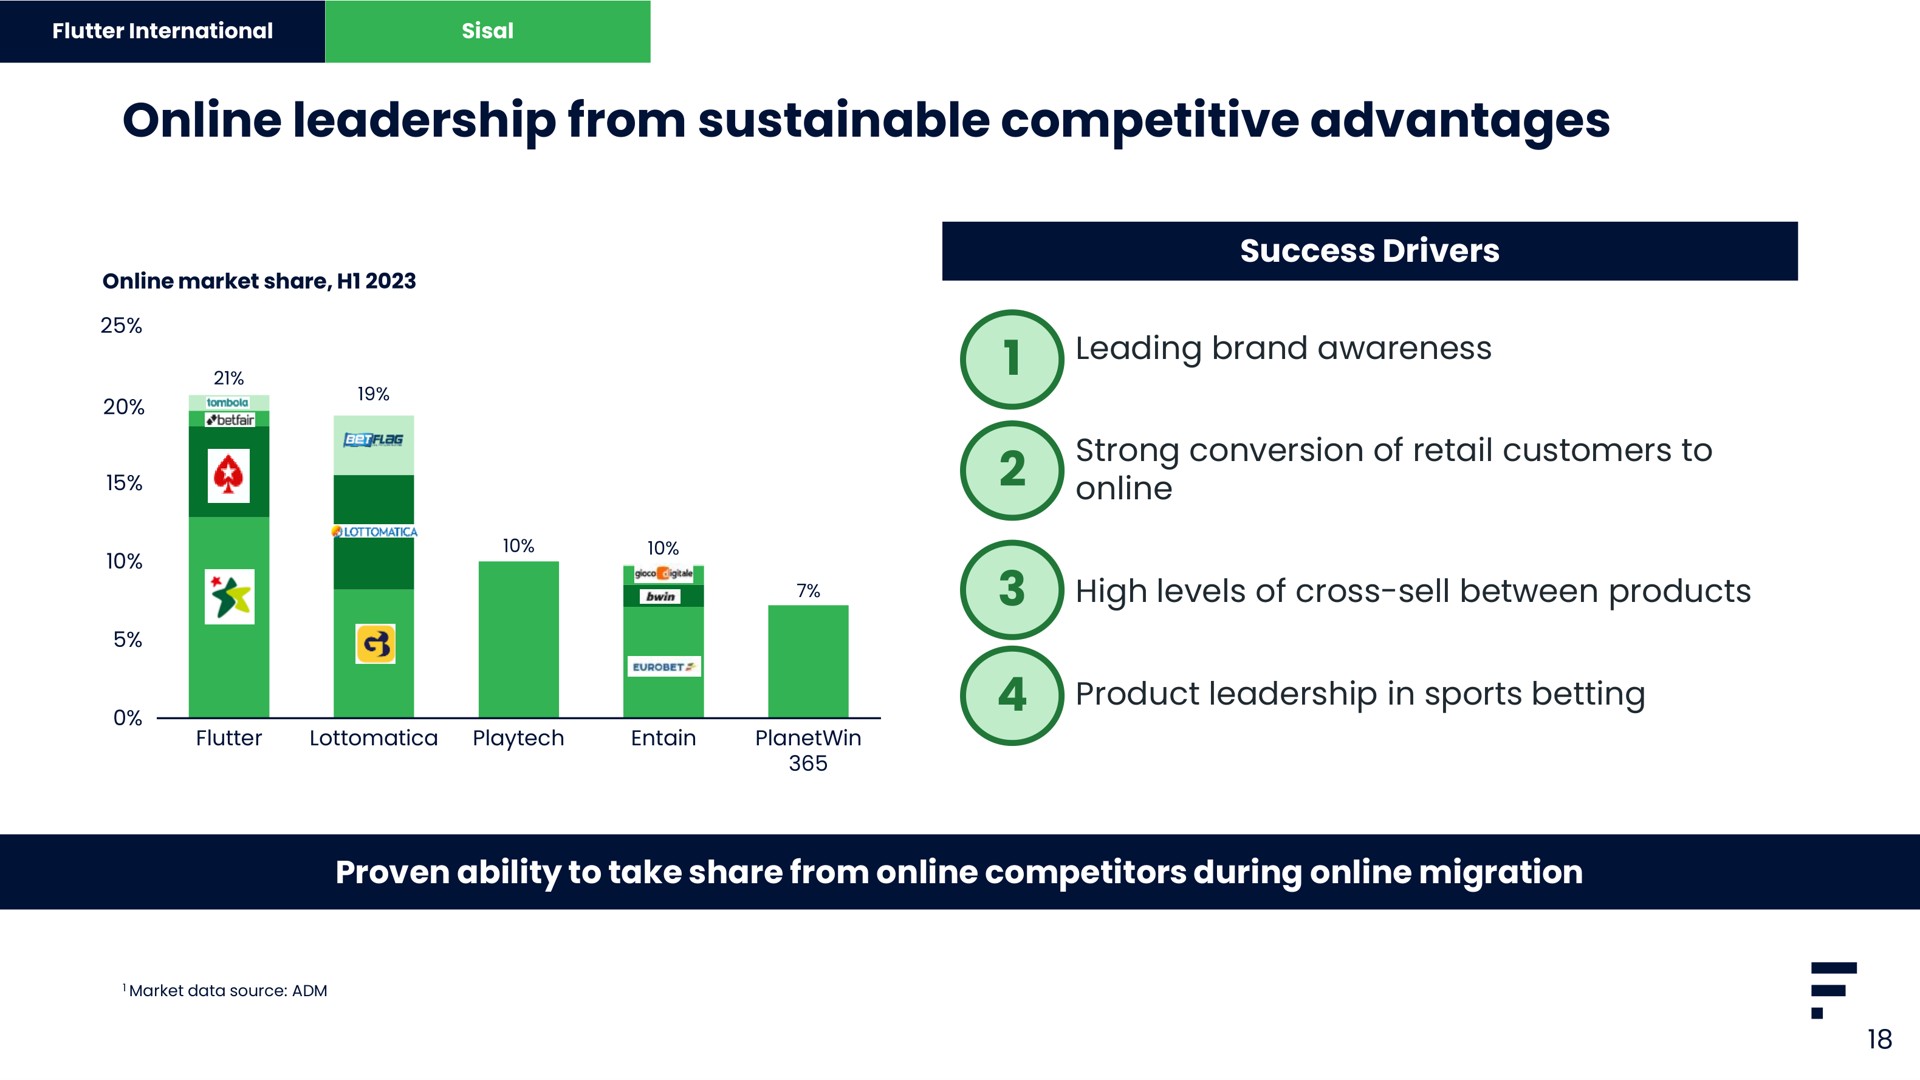 leadership from sustainable competitive advantages | Flutter